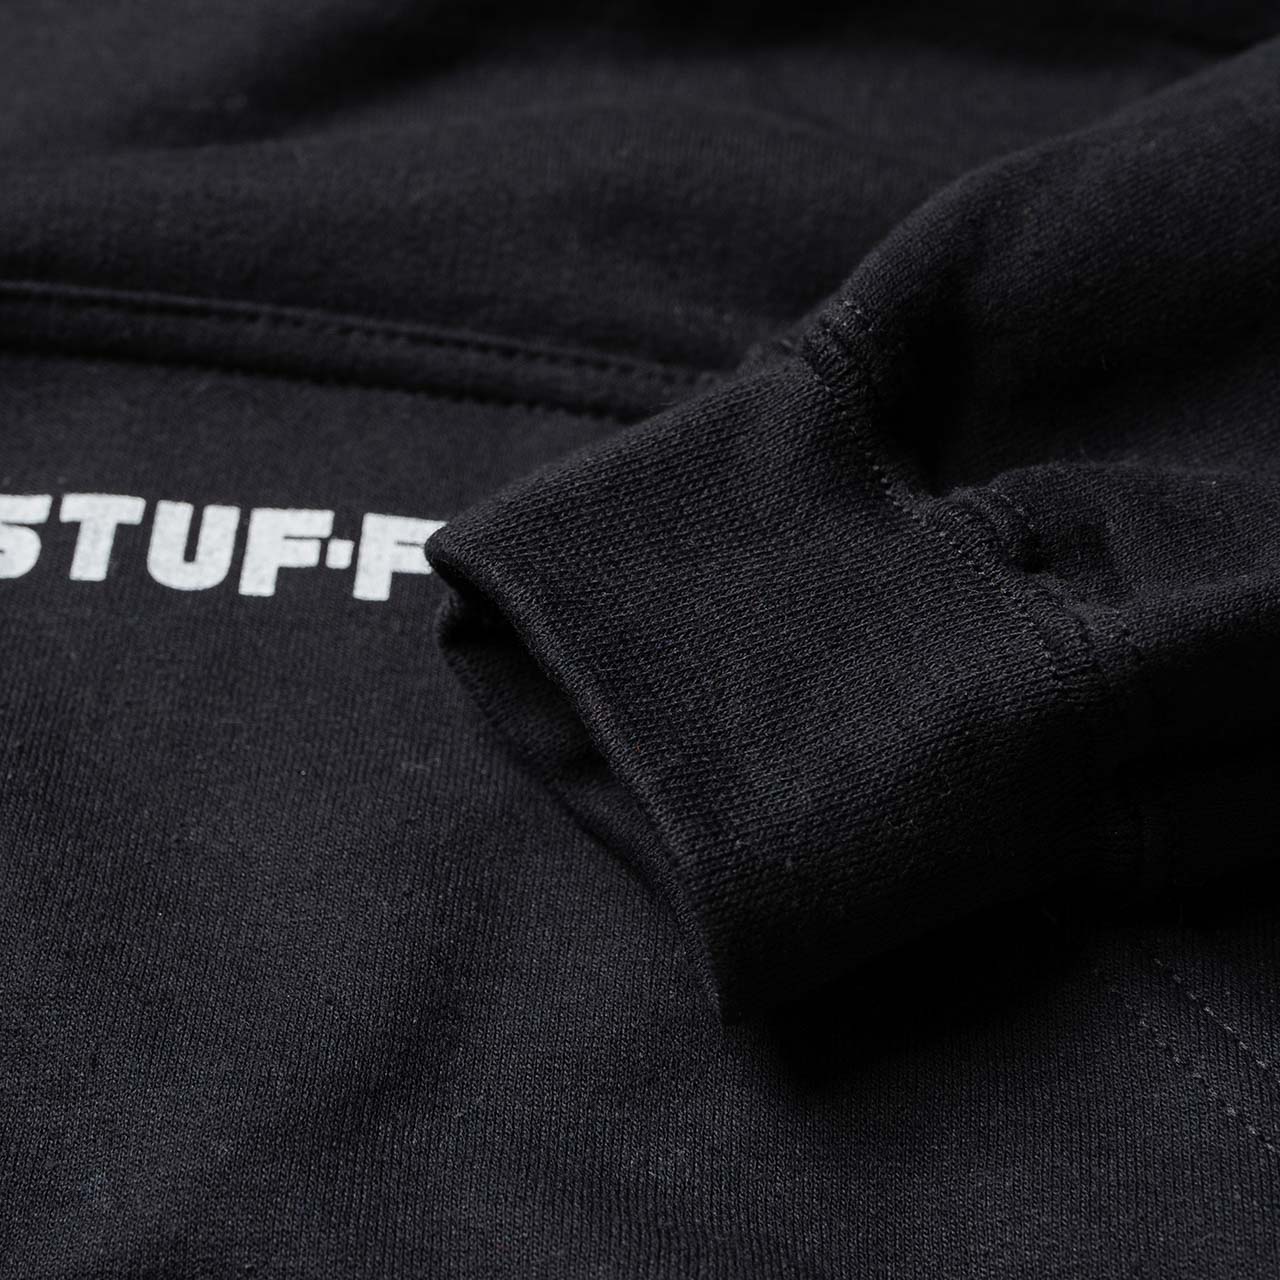 flagstuff "supper" hoodie (black) - 19aw-fs-40 - a.plus - Image - 3